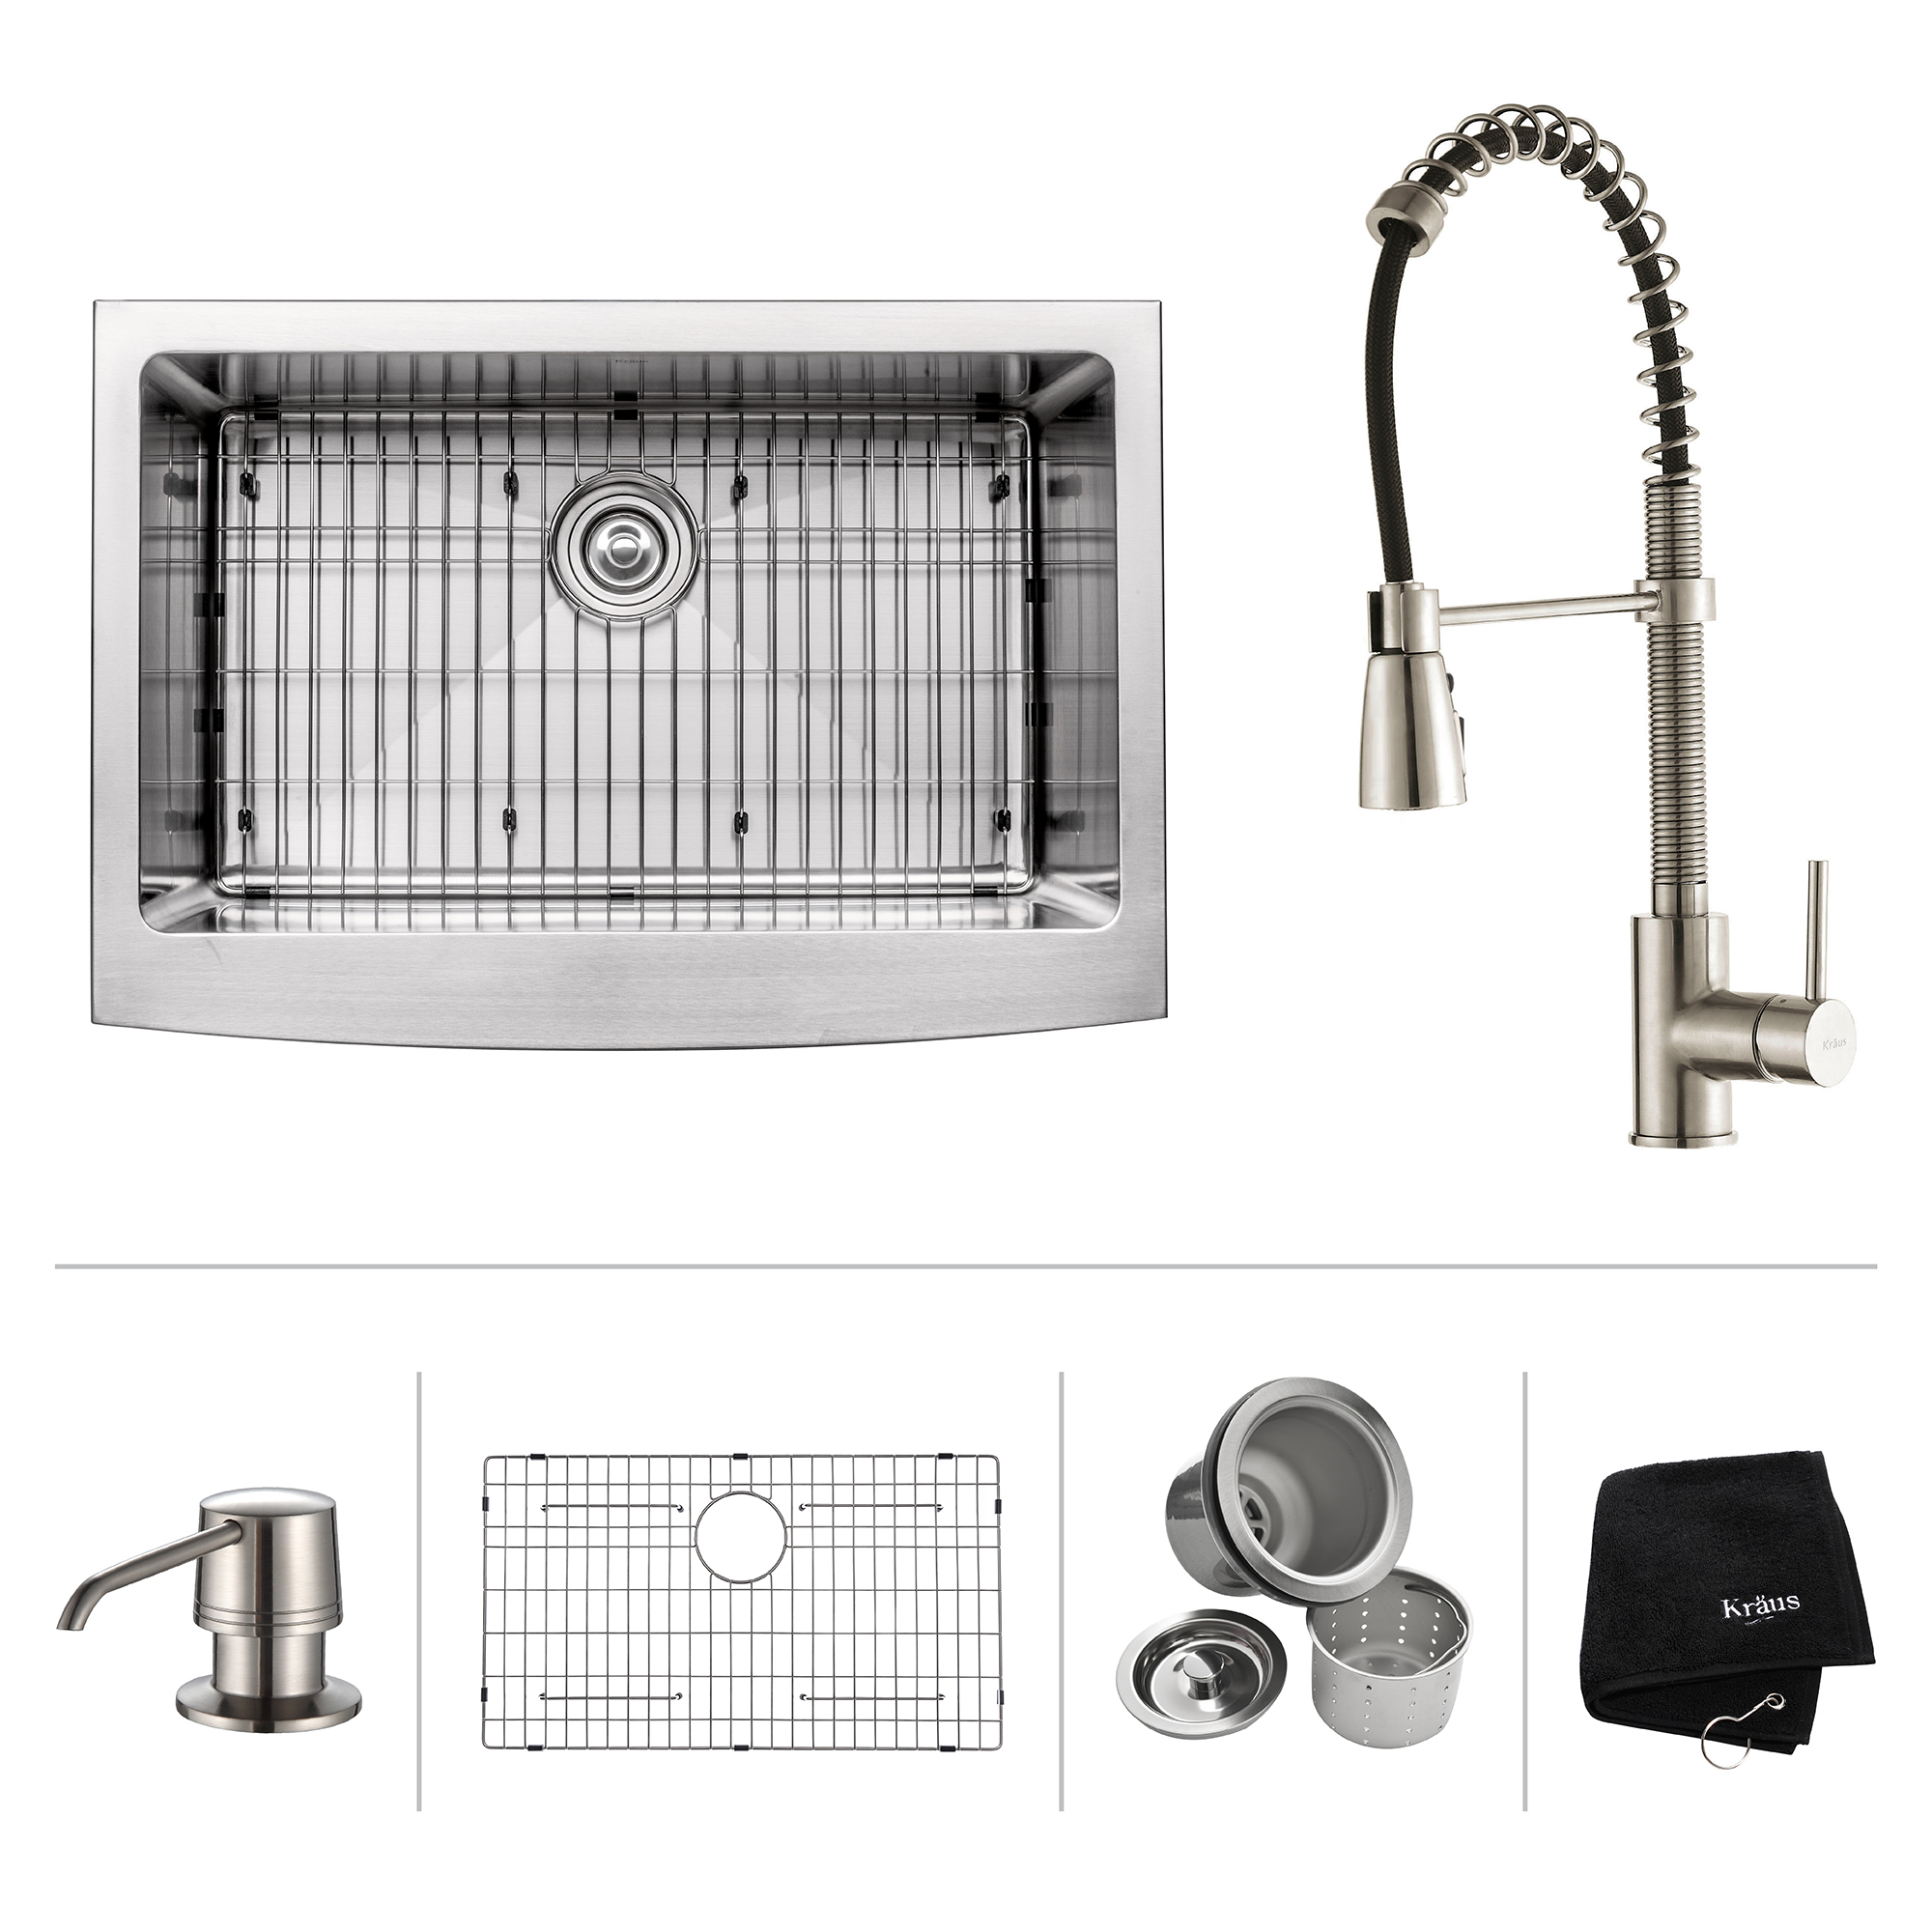 KRAUS 30 Inch Farmhouse Single Bowl Stainless Steel Kitchen Sink with Commercial Style Kitchen Faucet & Soap Dispenser in Stainless Steel - image 1 of 12